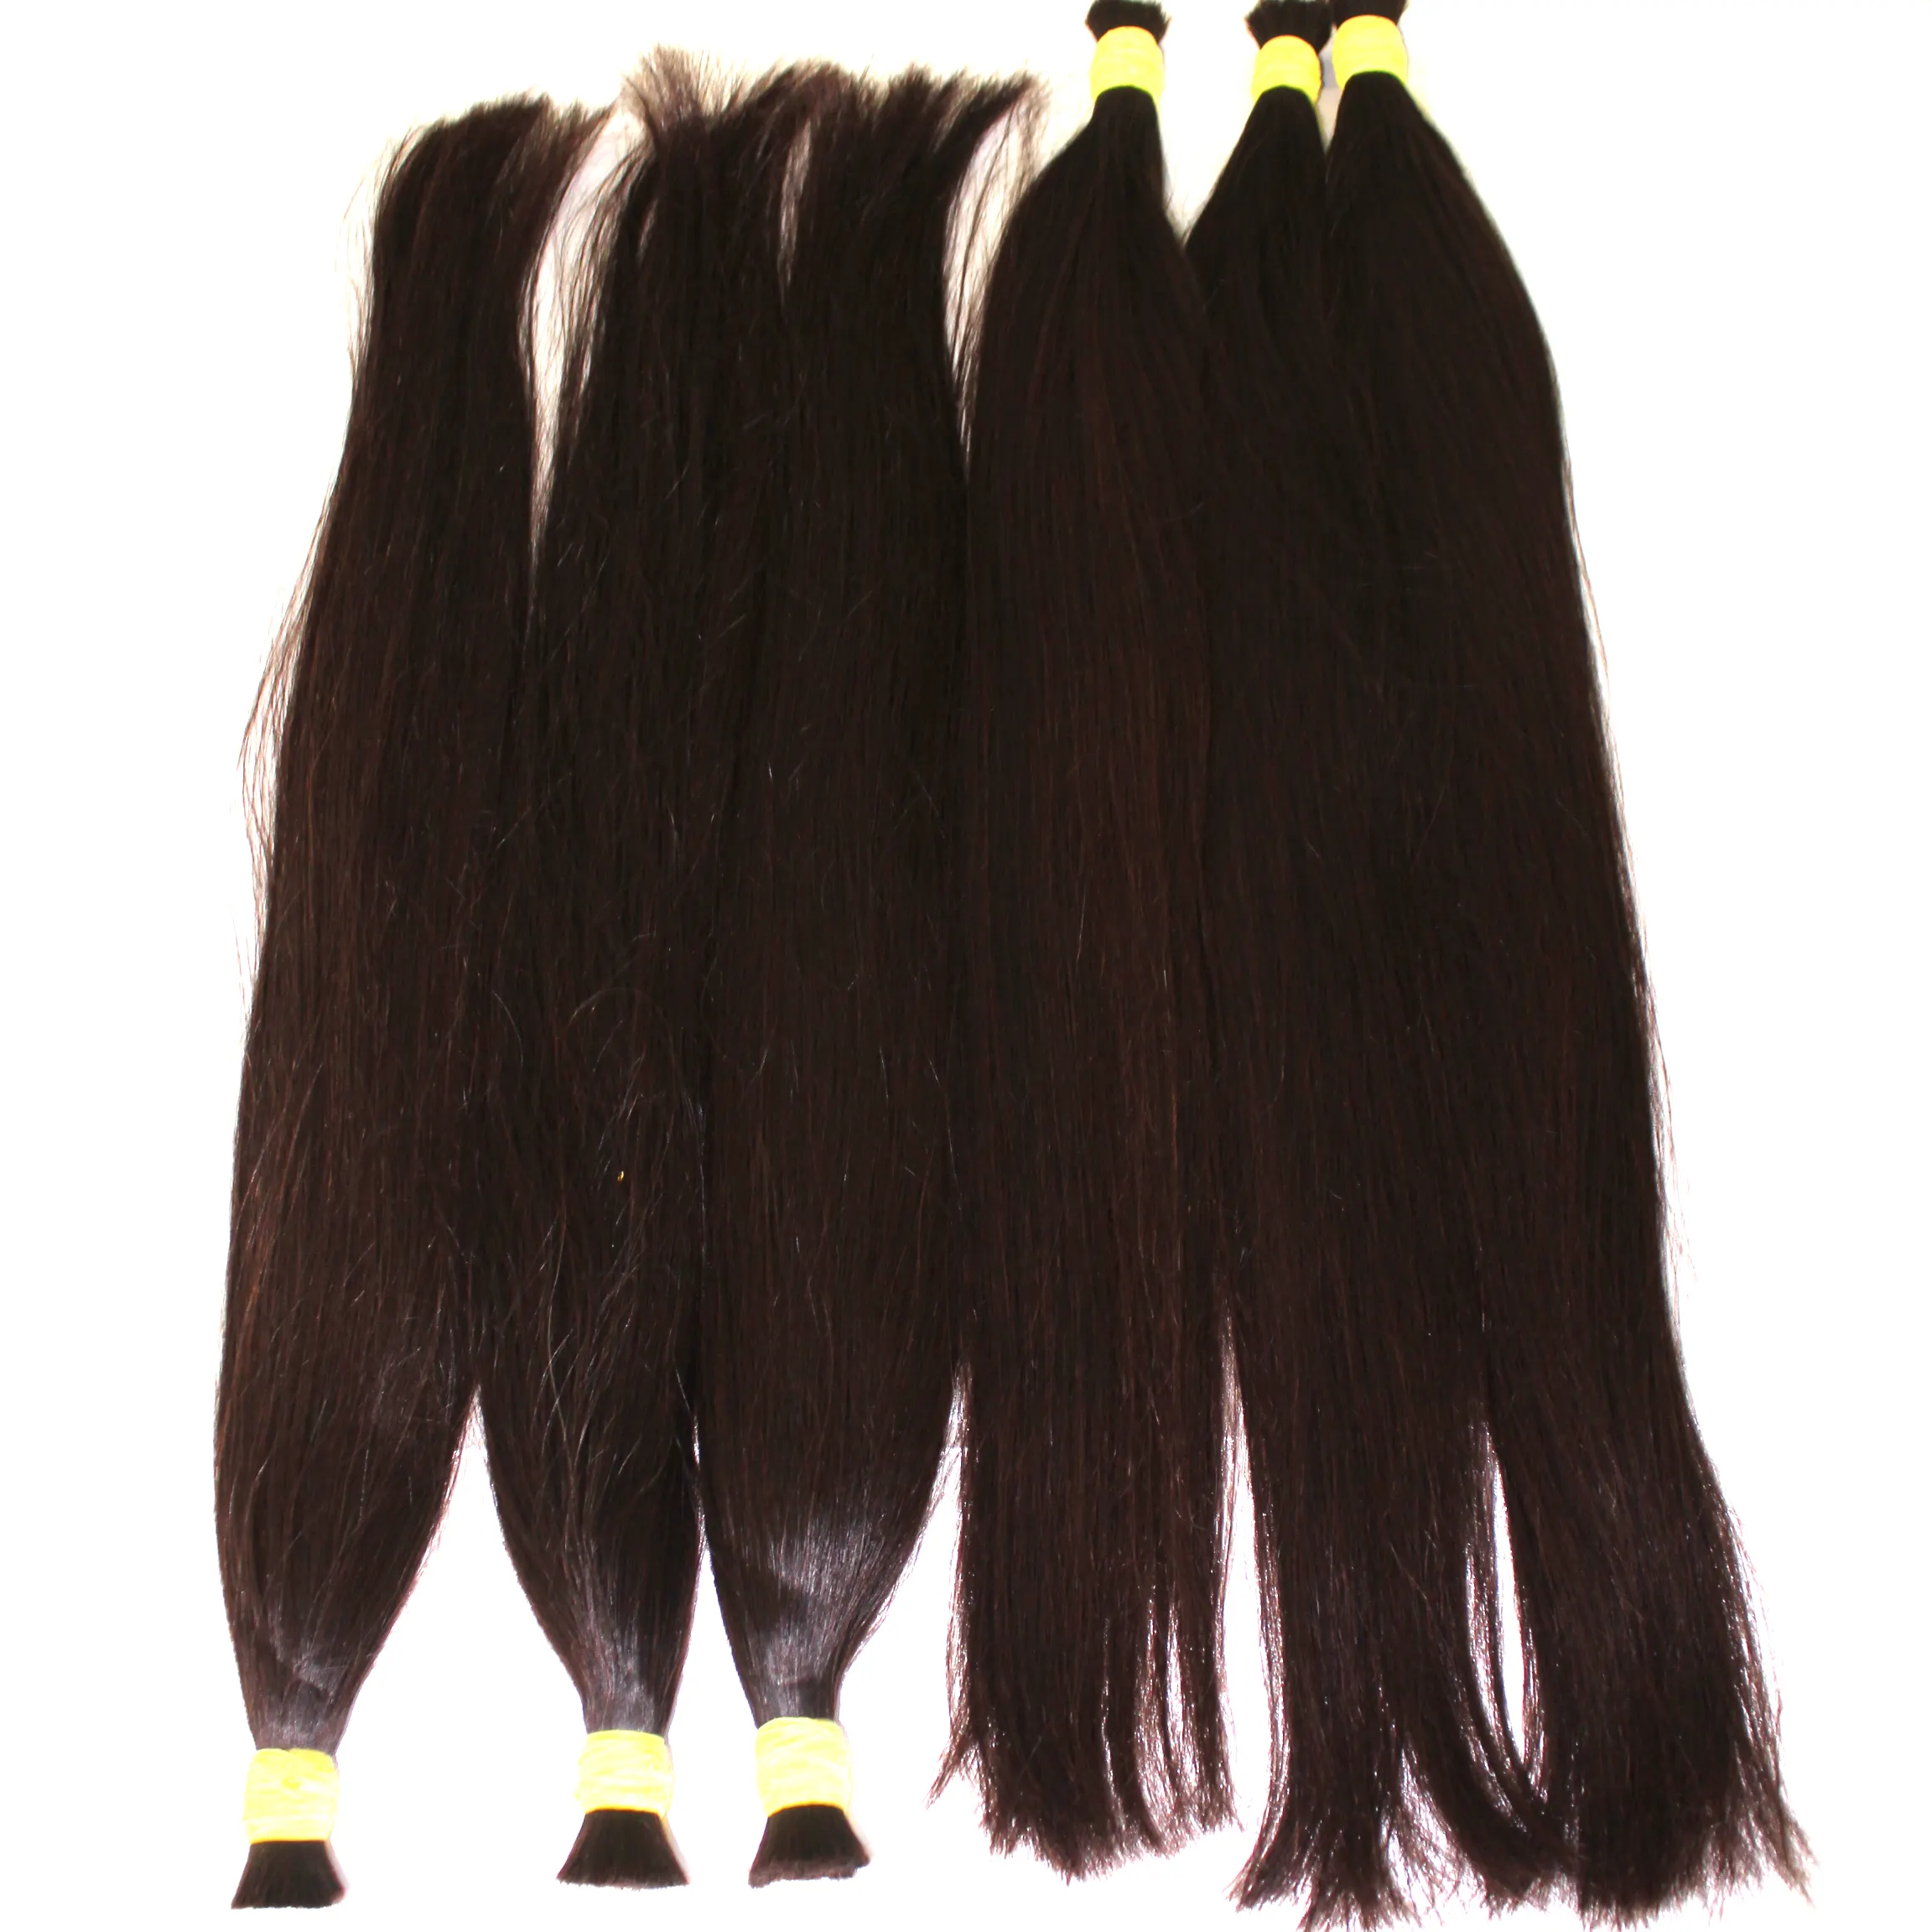 High Quality natural dark brown human hair from Vietnam, Wholesale highlight brown with blonde body wave human hair